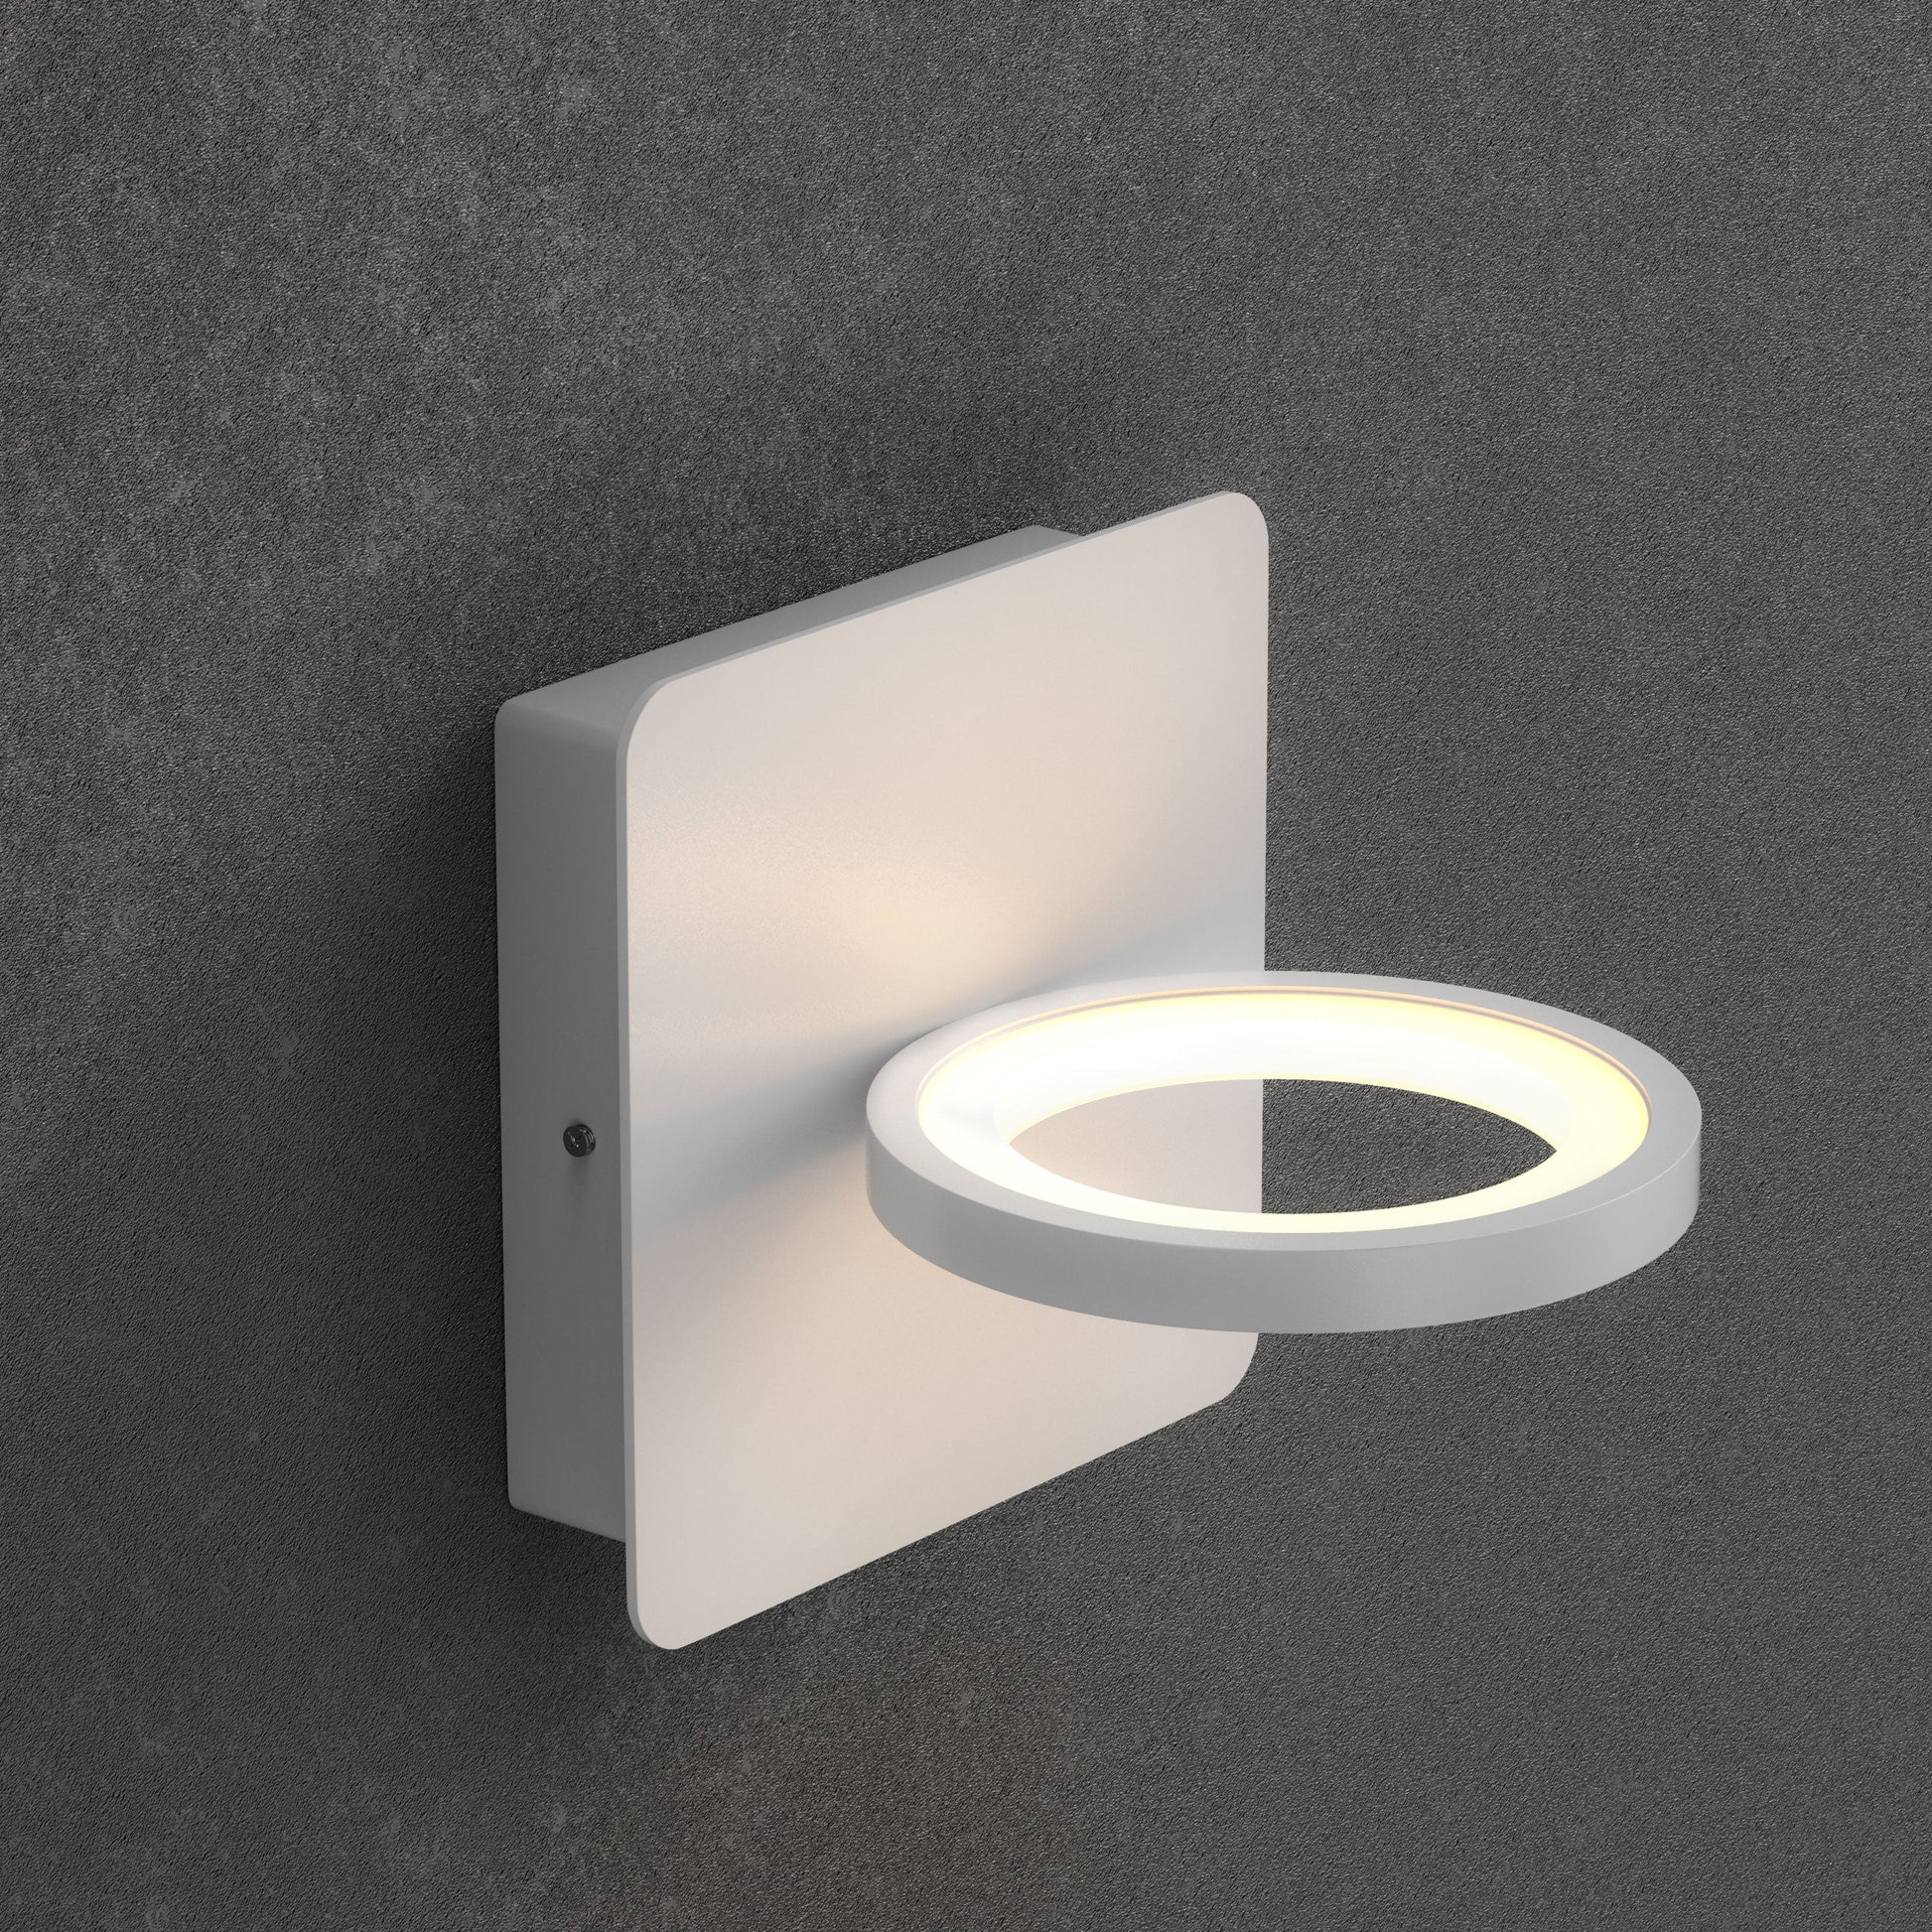 1-ring-light-wall-lamp-sconces-8w